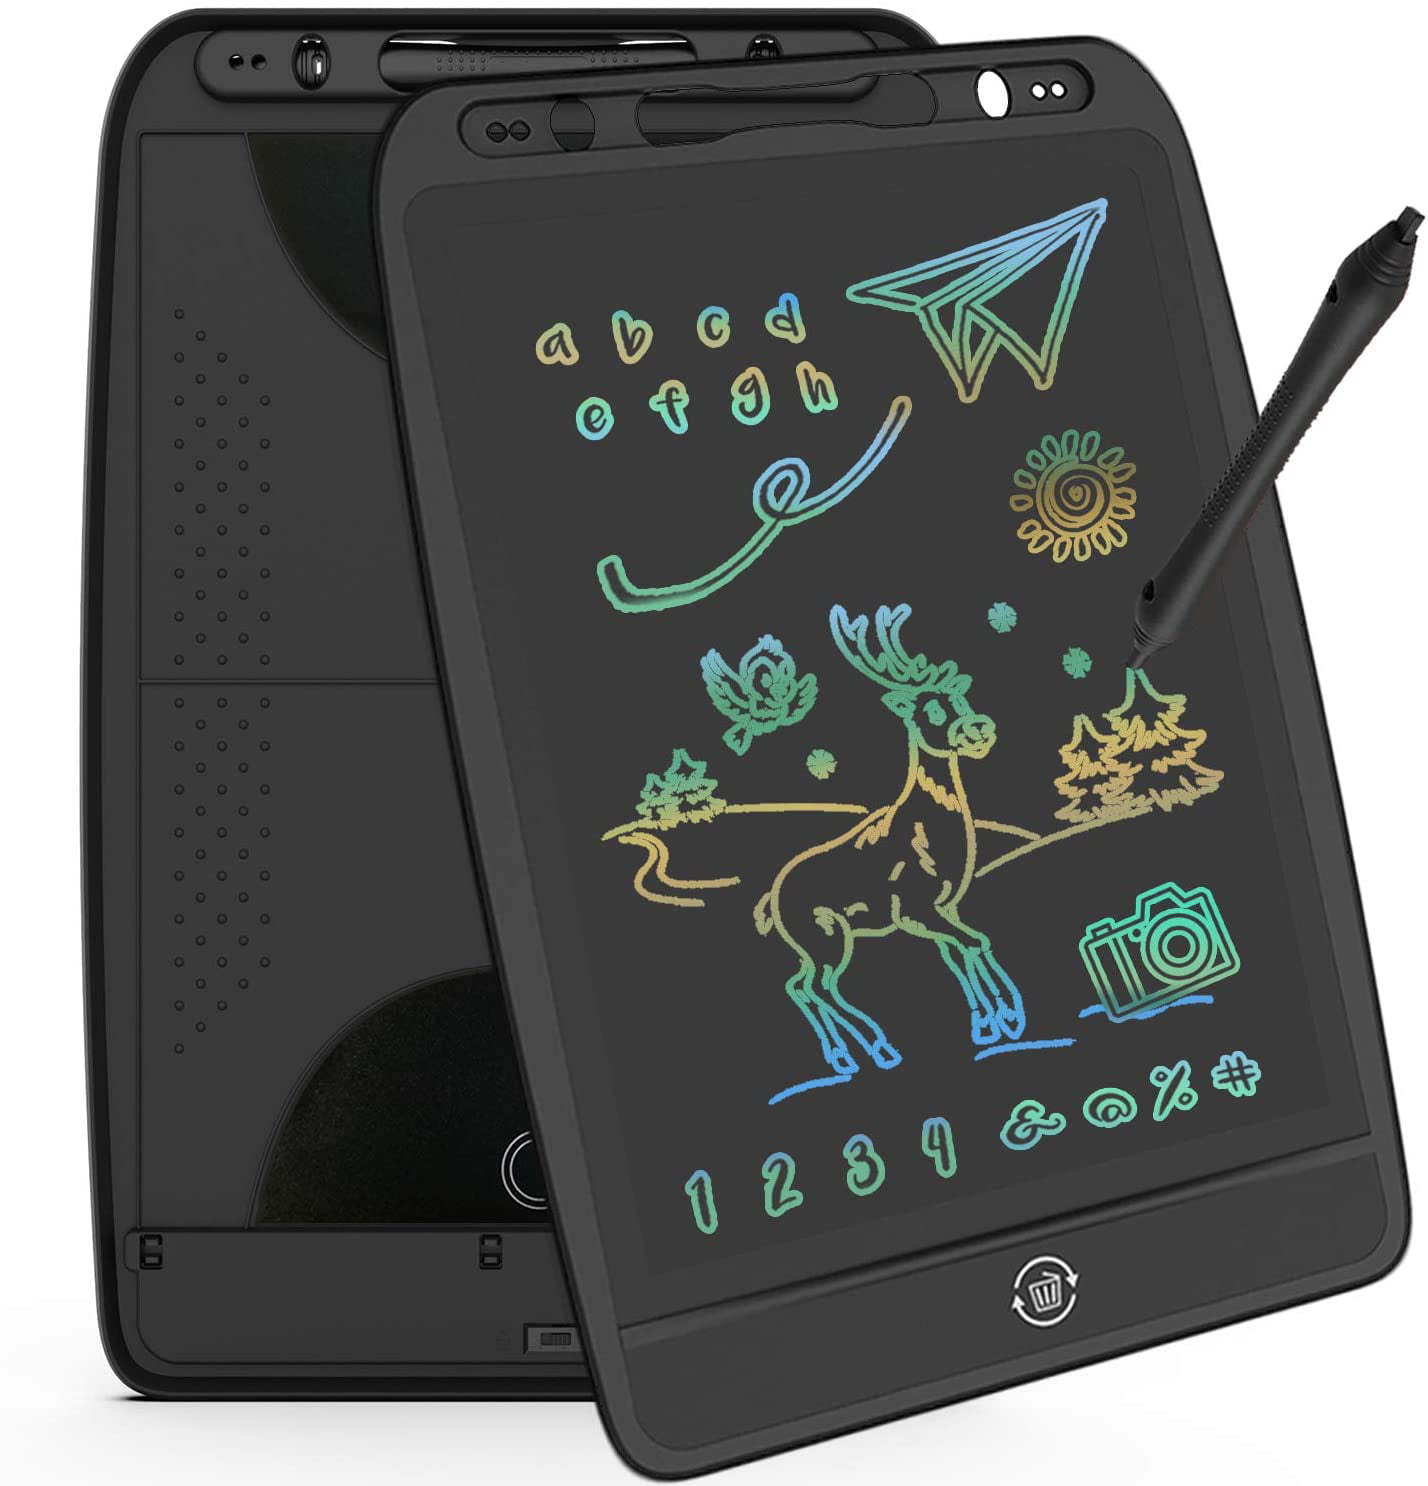 mom&myaboys 10 inch LCD Writing Tablet for Kids Erasable Doodle Drawing Board with Color Screen Black Digital Scribble and Play Toddlers Pads,Best Gifts Learning Toys Age 3+ and Adults Massage.